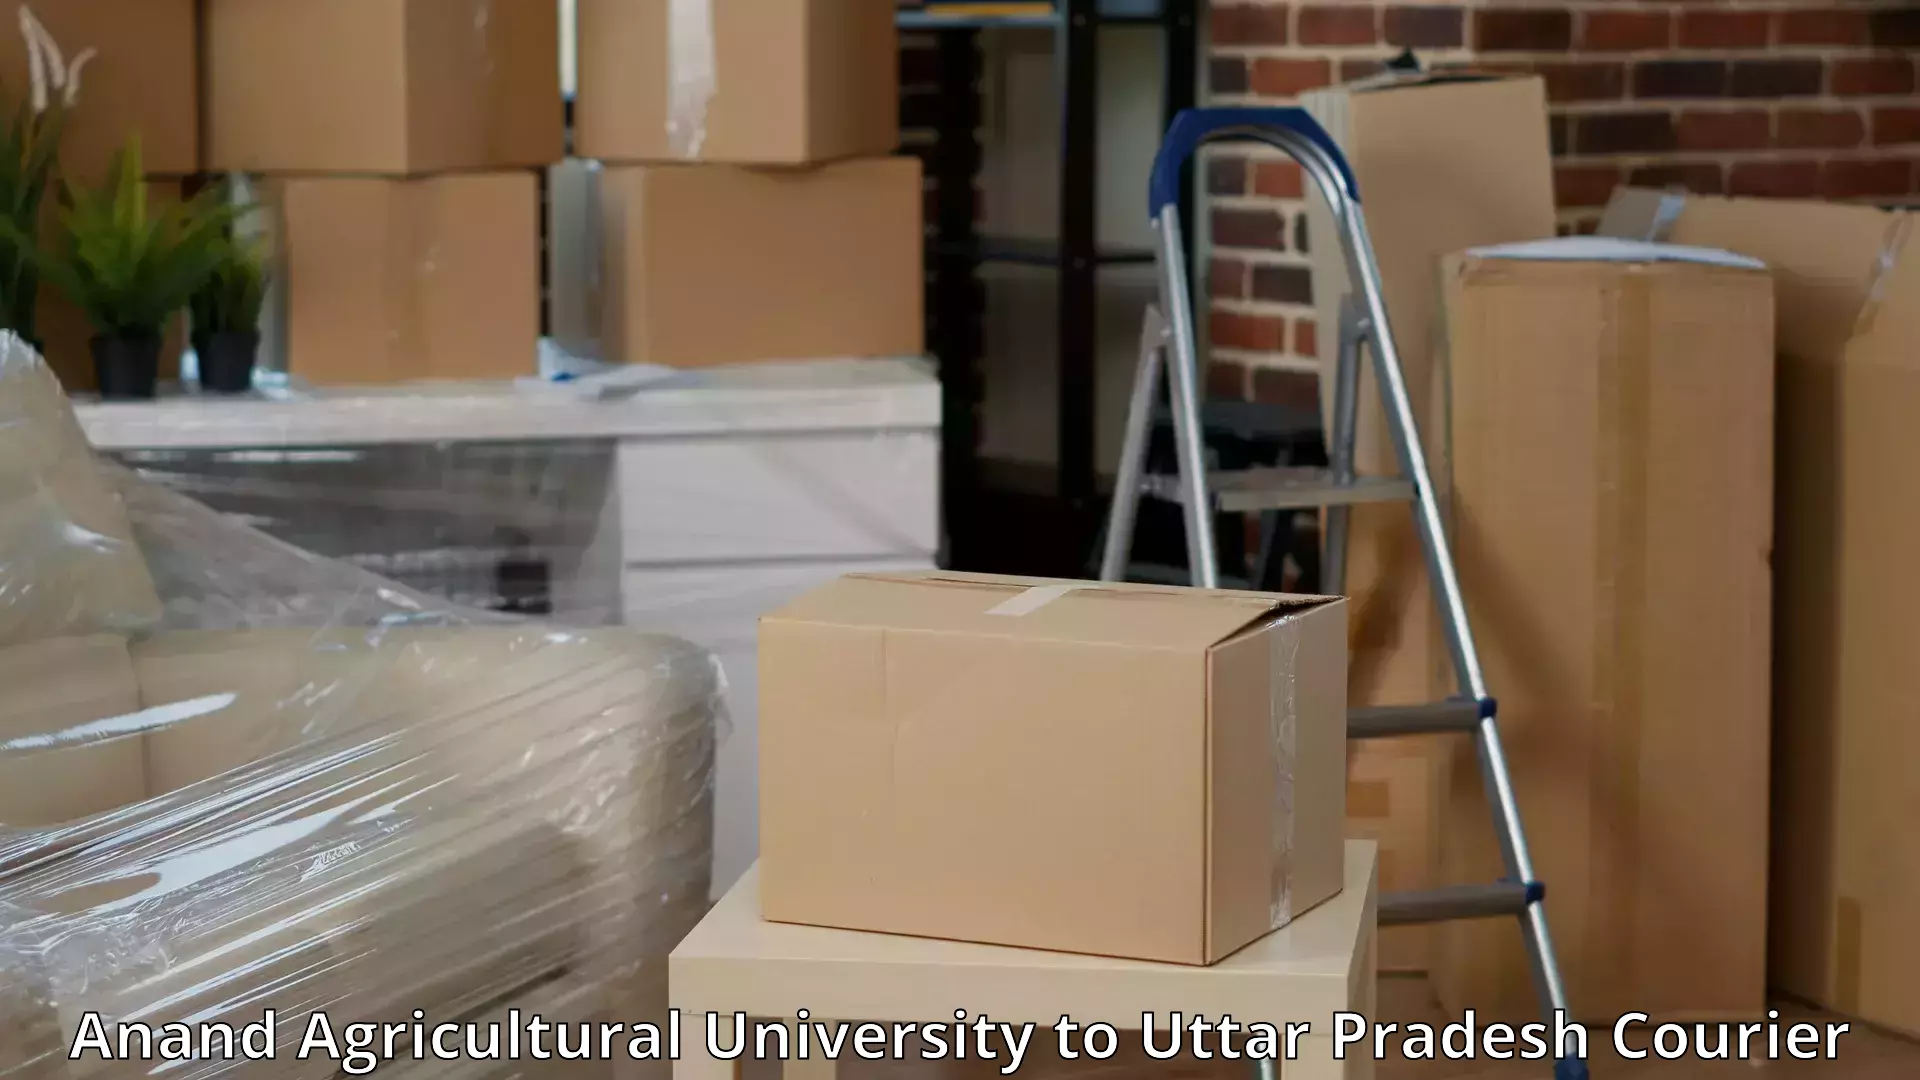 Furniture transport and storage Anand Agricultural University to Afzalgarh